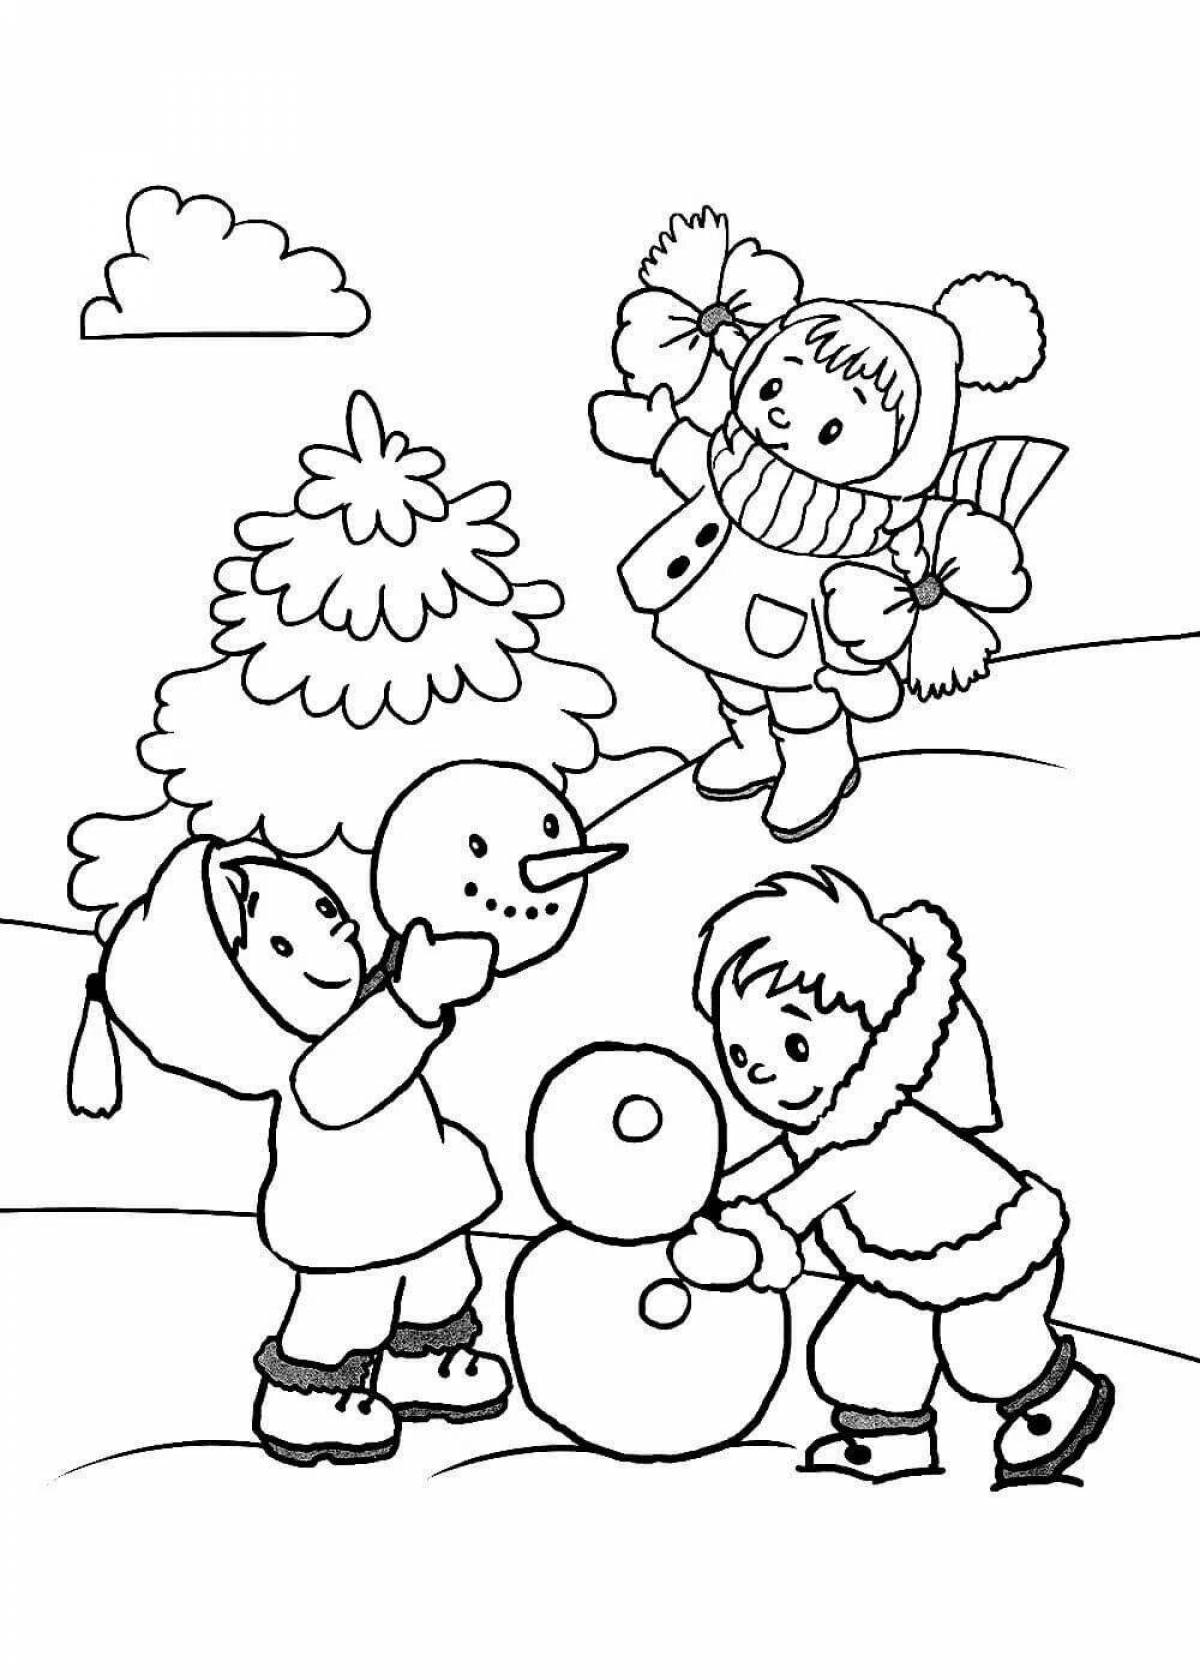 Dynamic winter games coloring page